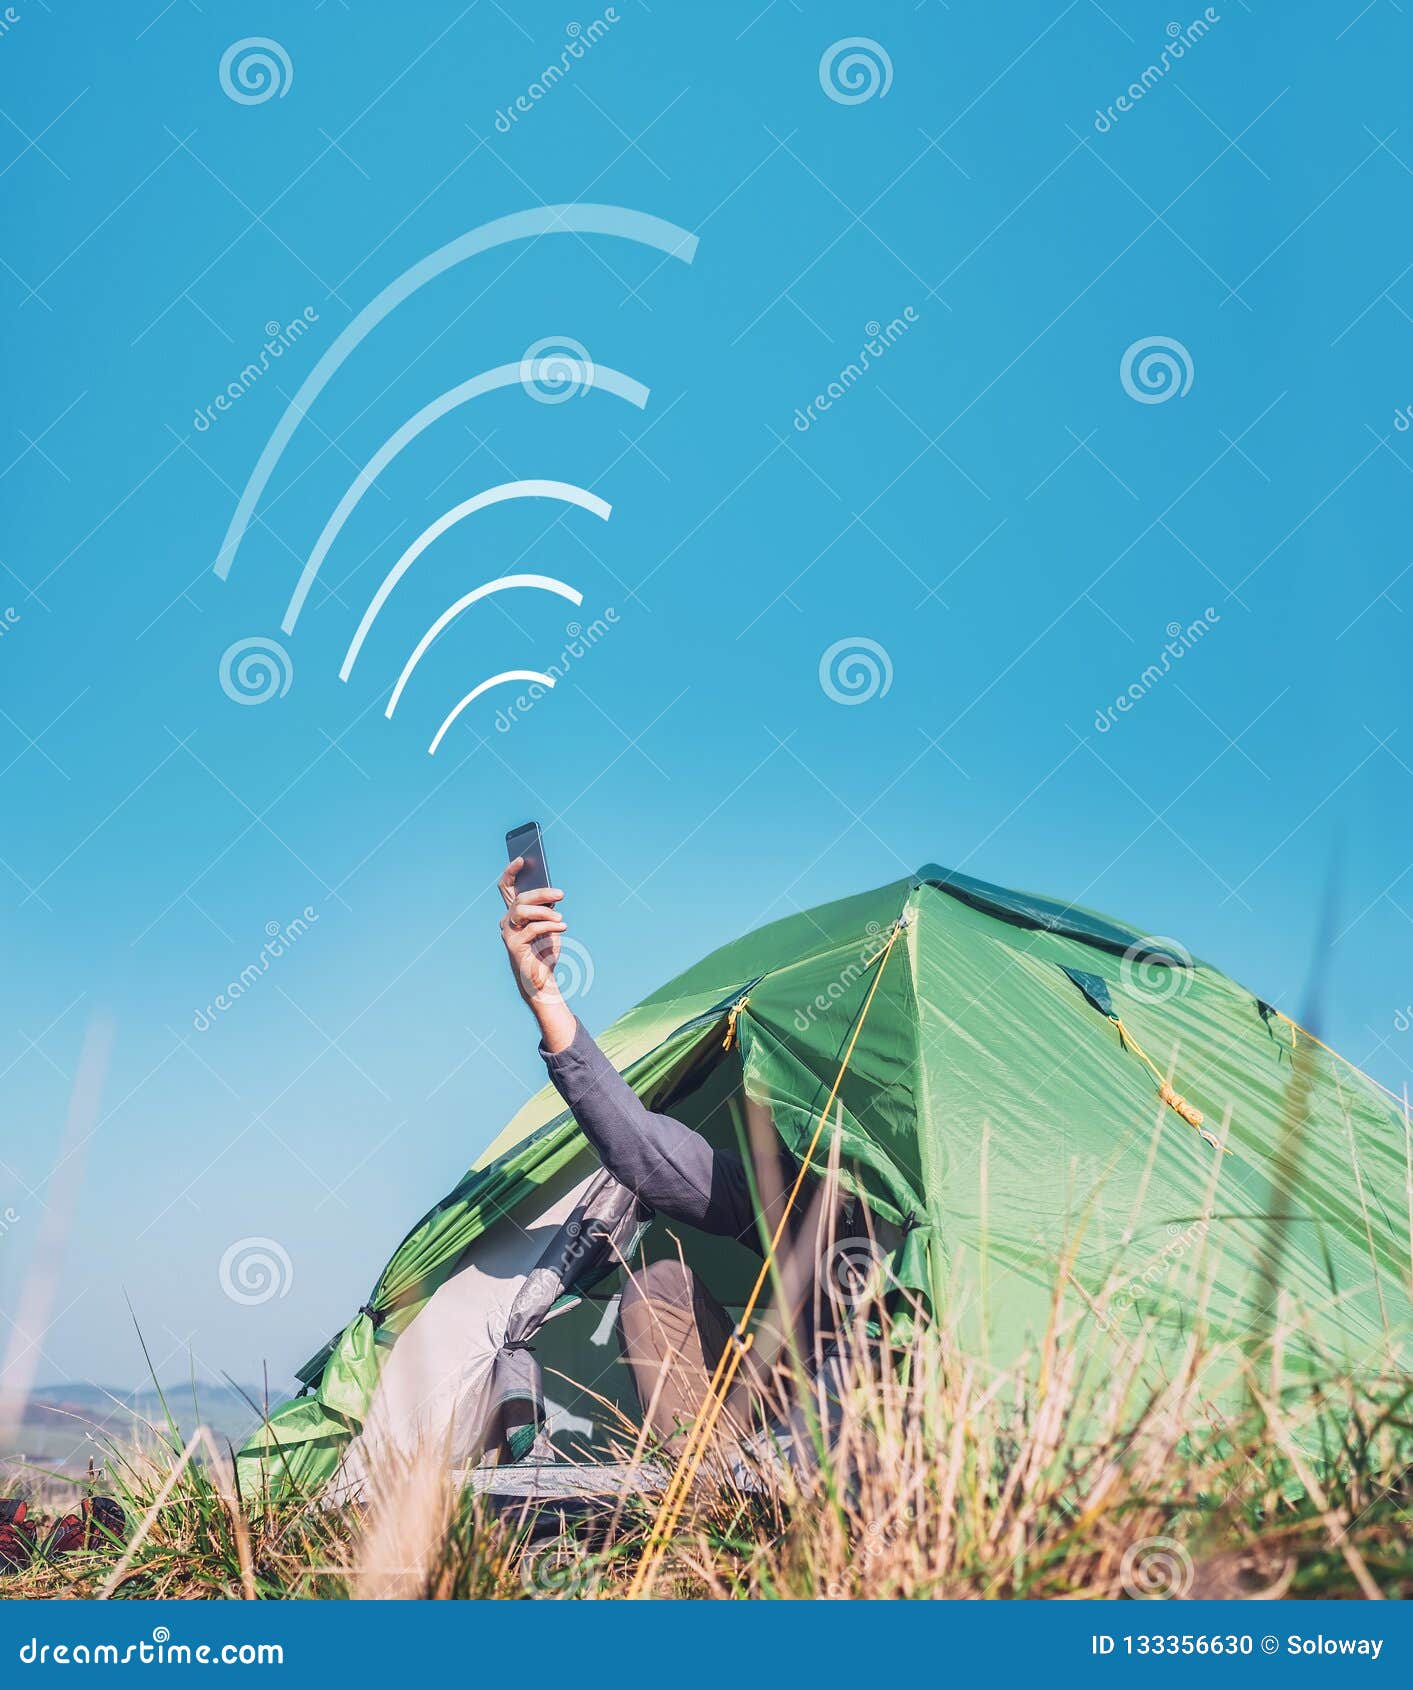 traveler sits in touristic camping tent and tries to catch cellular network. cell web coverage and roaming concept image.